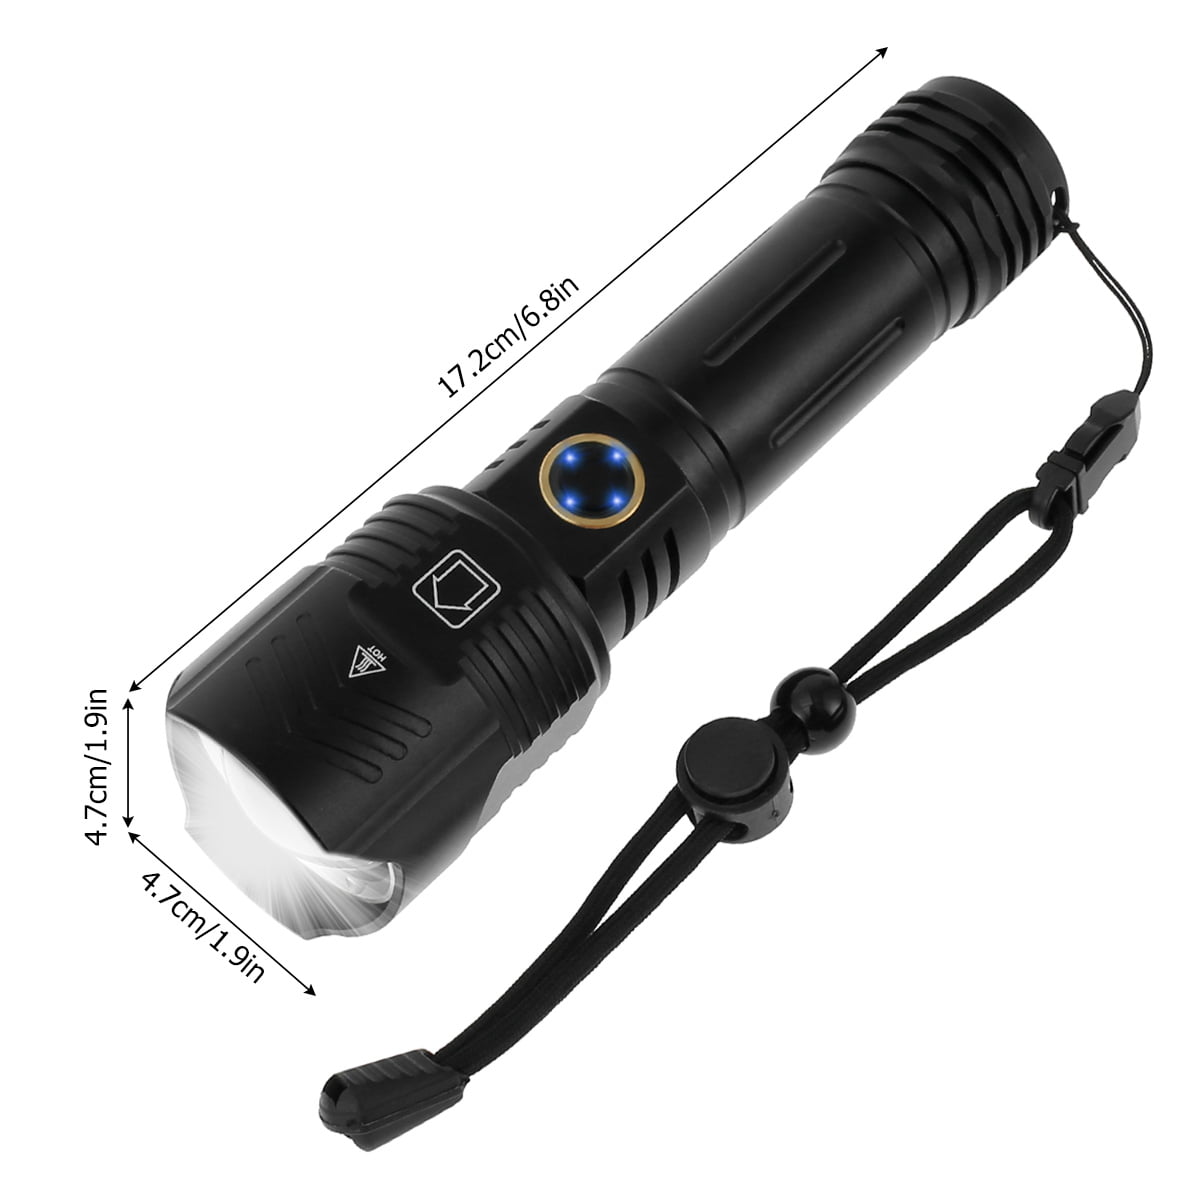 GLADIATOR ALUMINIUM BODY BLACK 5 MODE COMPACT SUPER BRIGHT TORCH WITH CARRY CASE